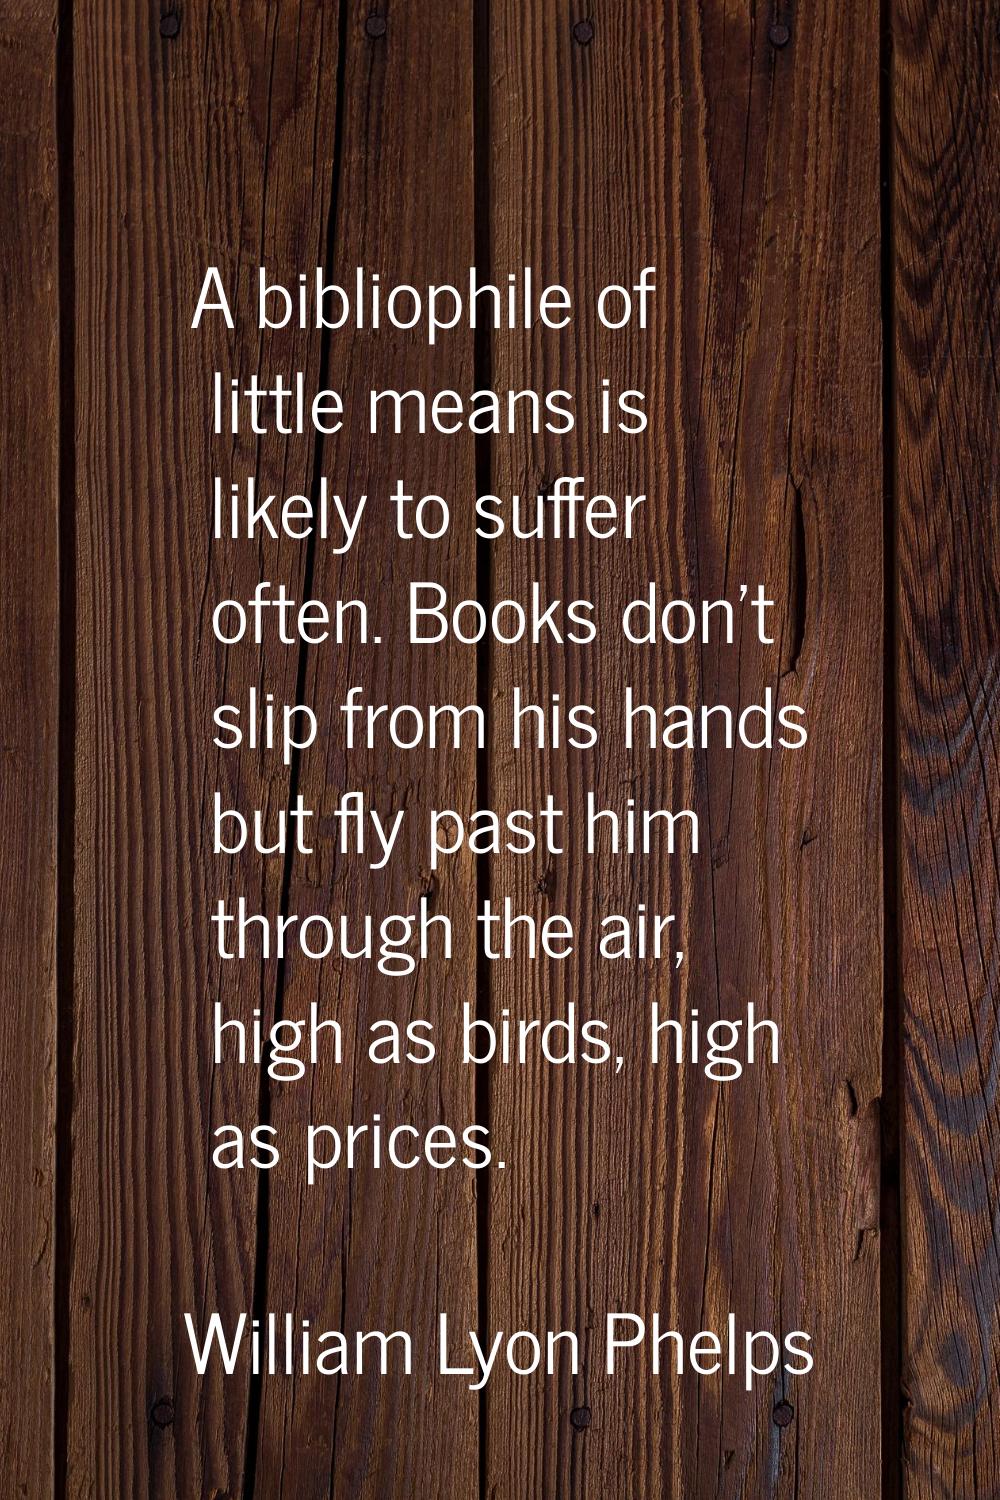 A bibliophile of little means is likely to suffer often. Books don't slip from his hands but fly pa